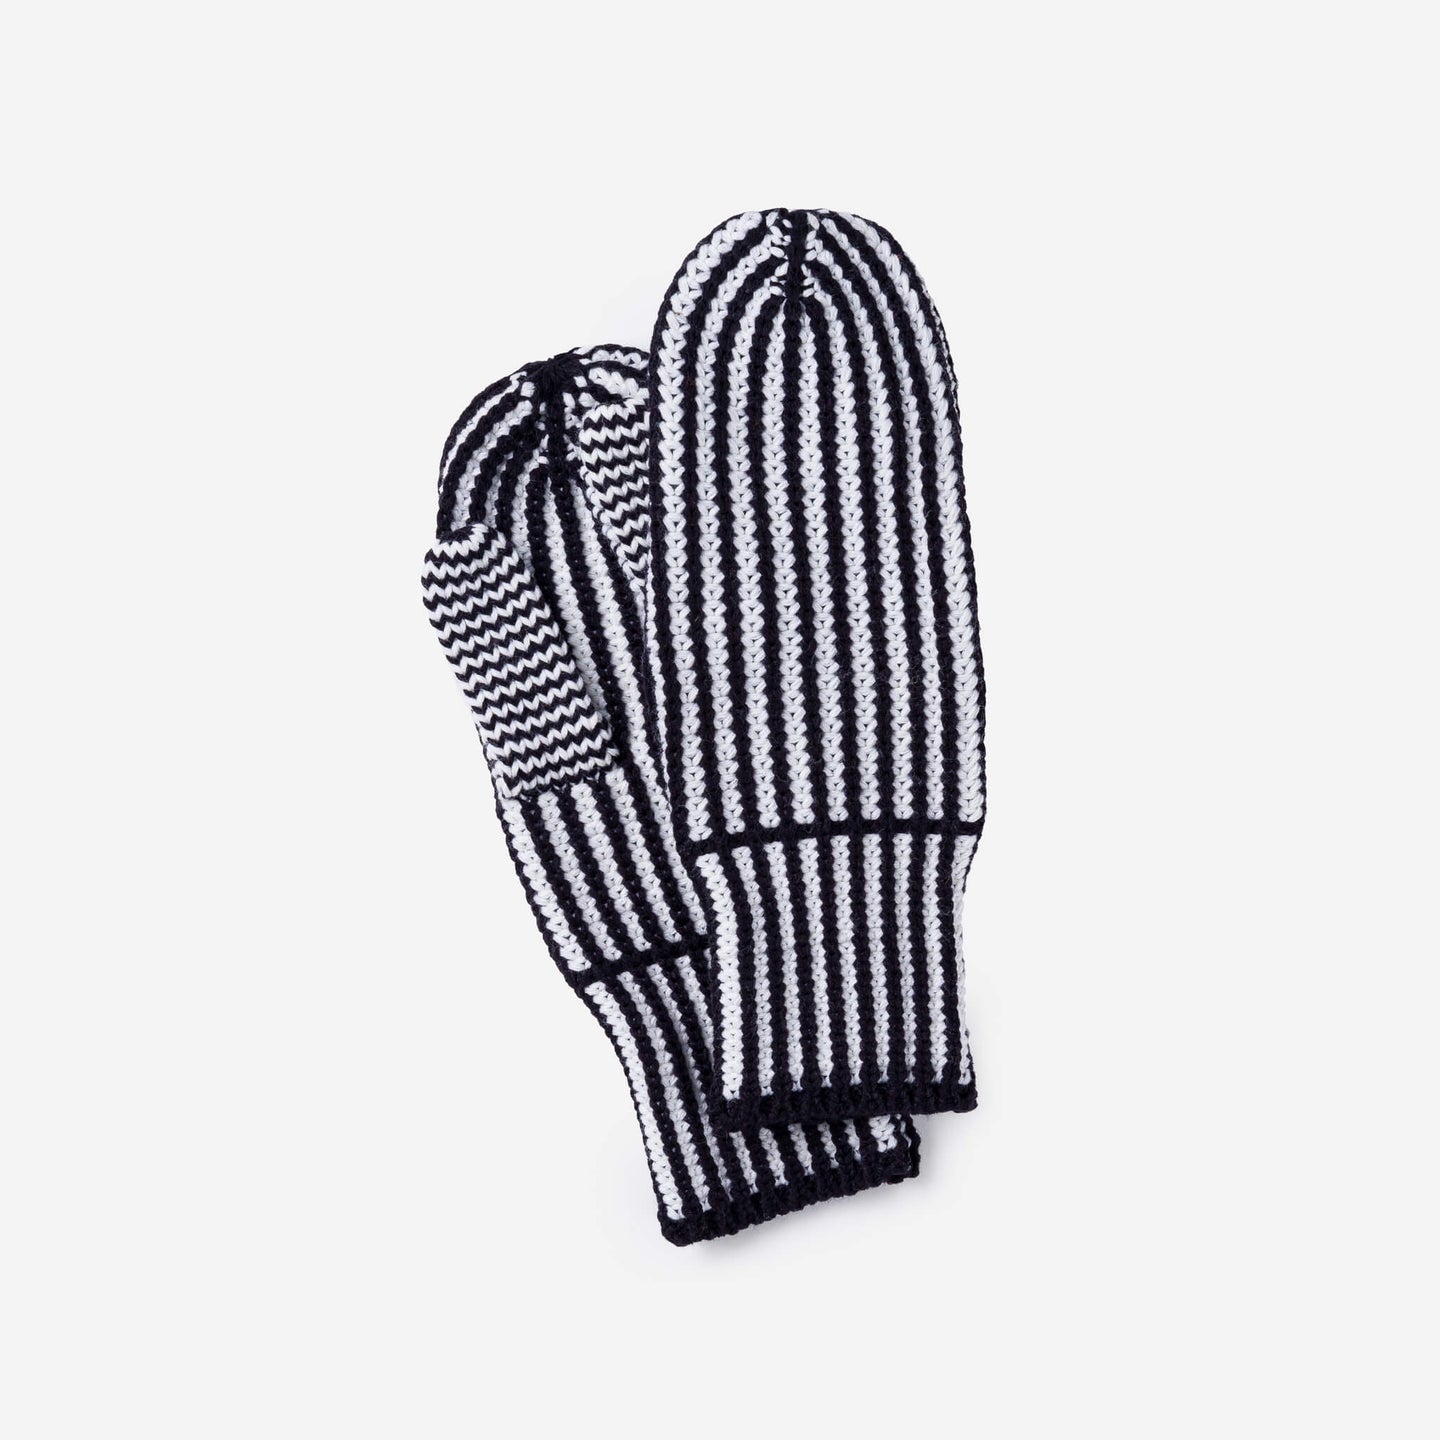 Stripe Knit Mittens Fully Lined Warm Toasty Gloves